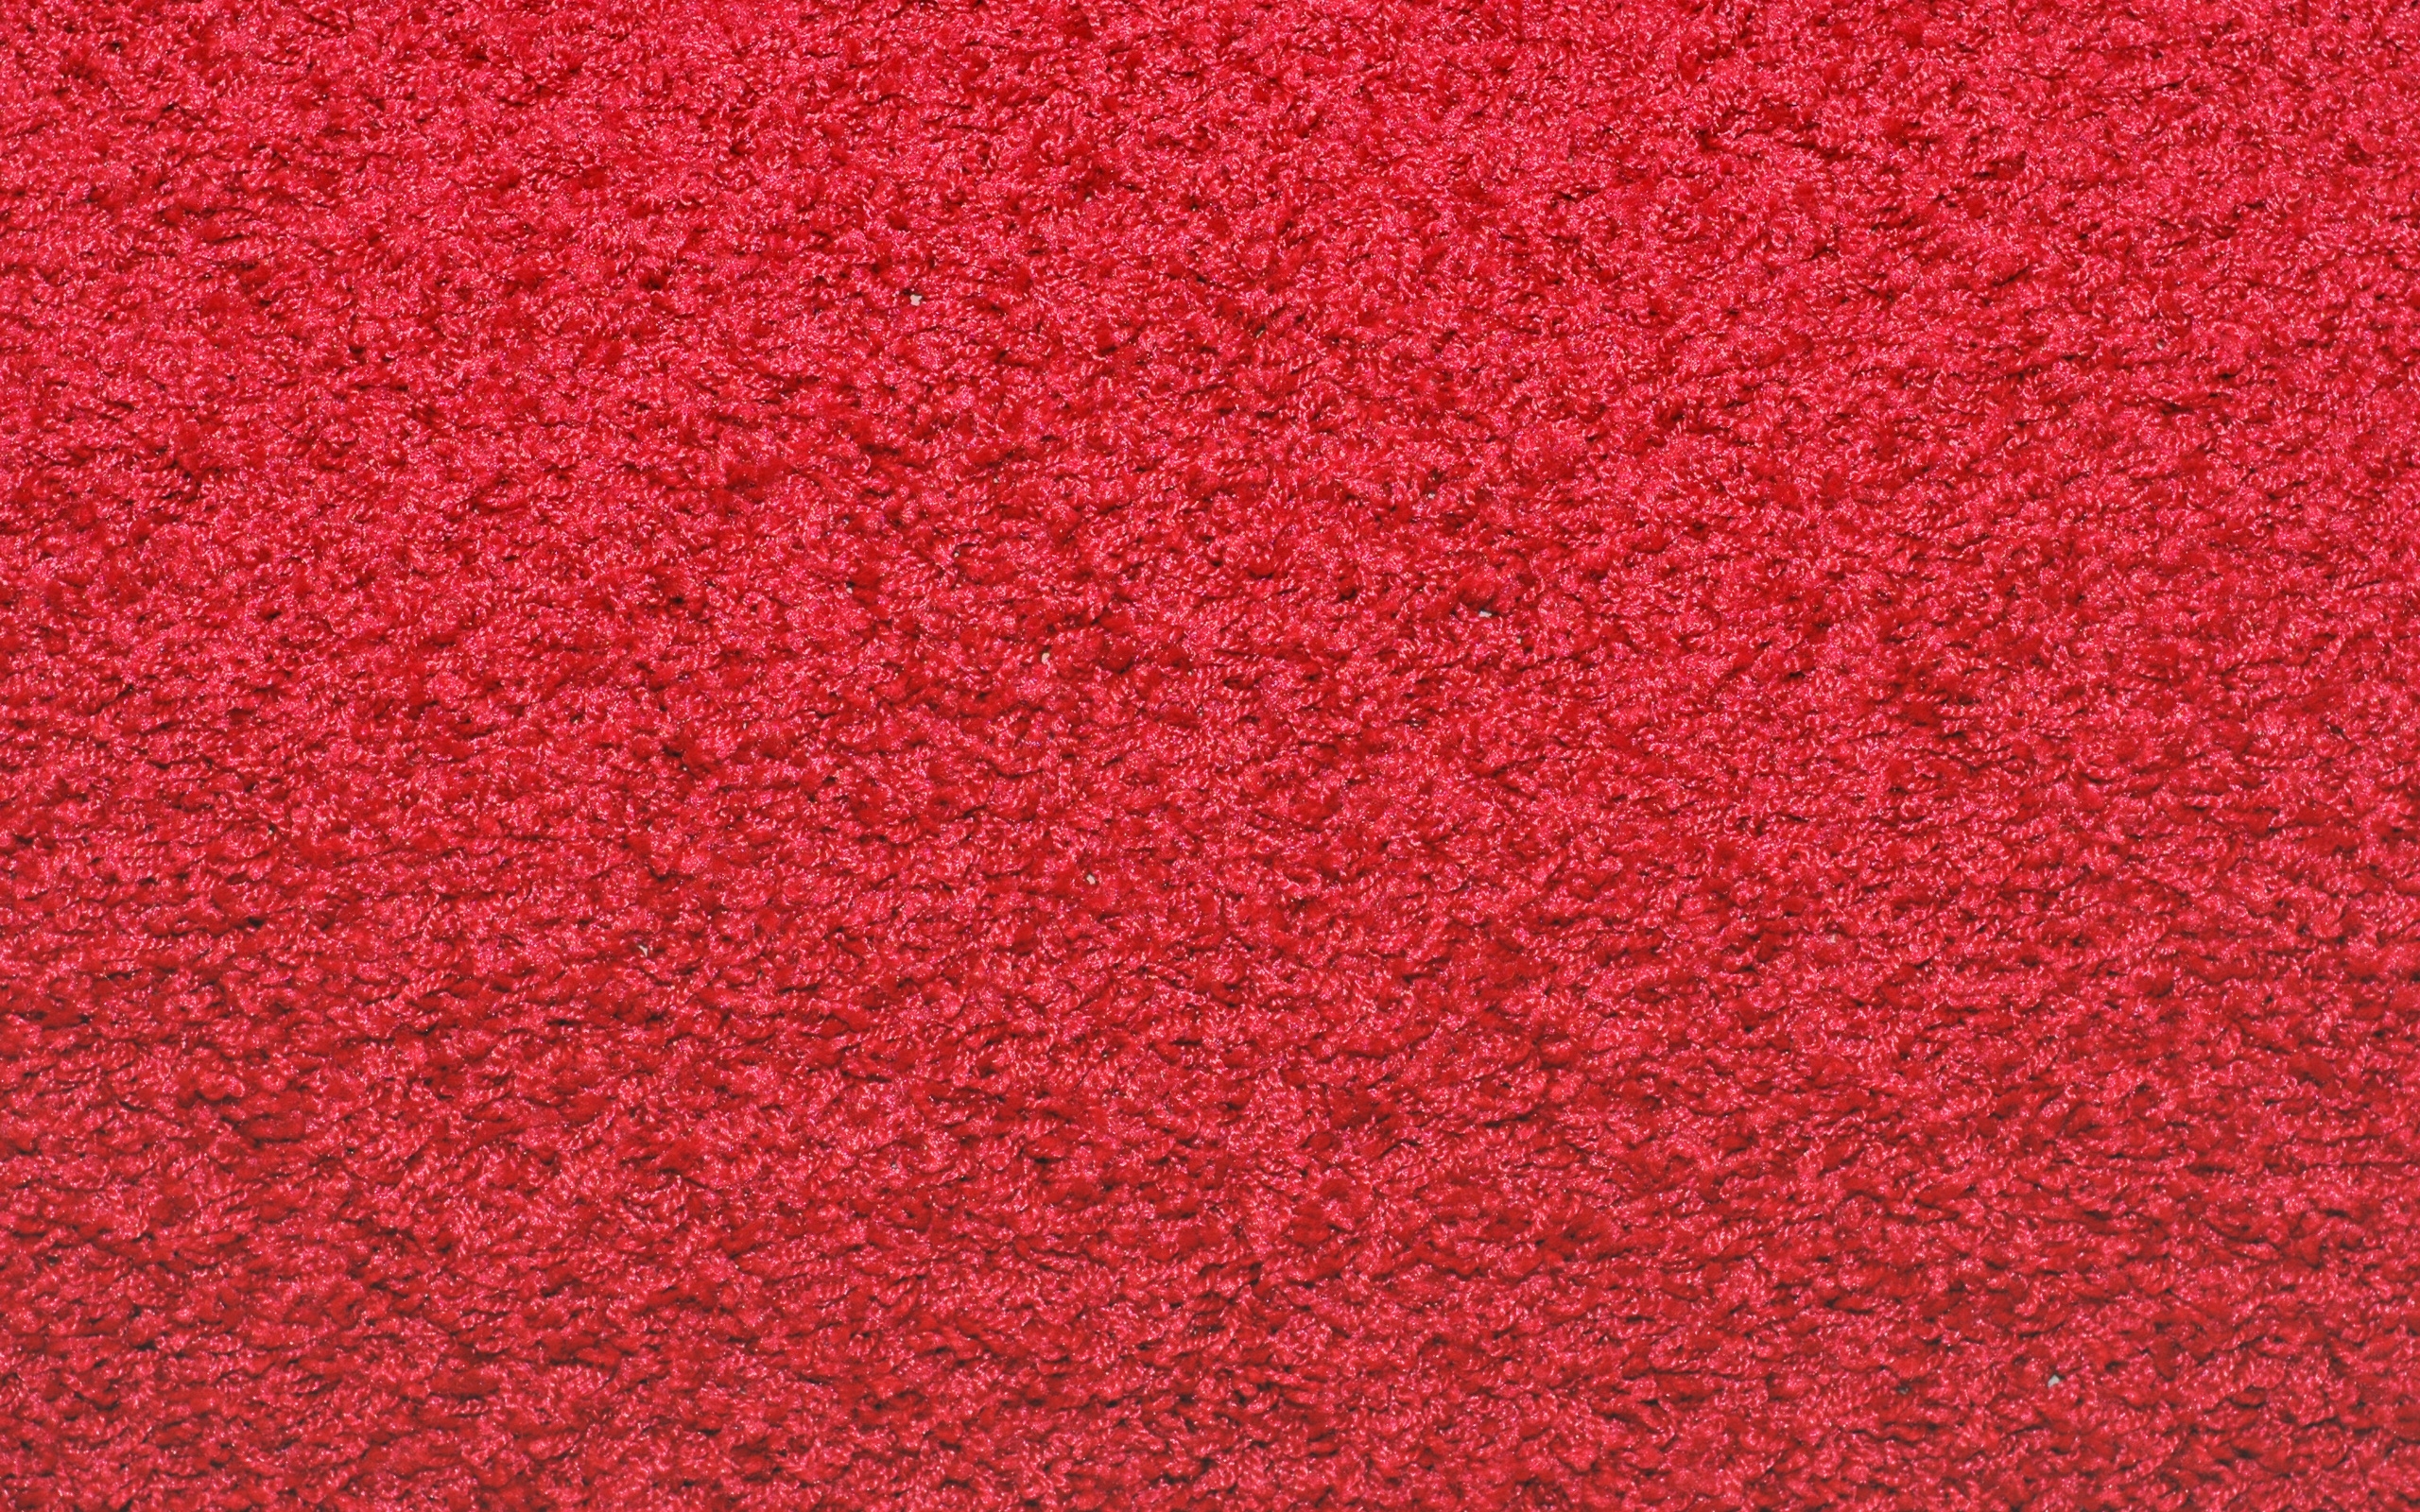 Wallpaper, bright, red, carpet, background 2560x1600